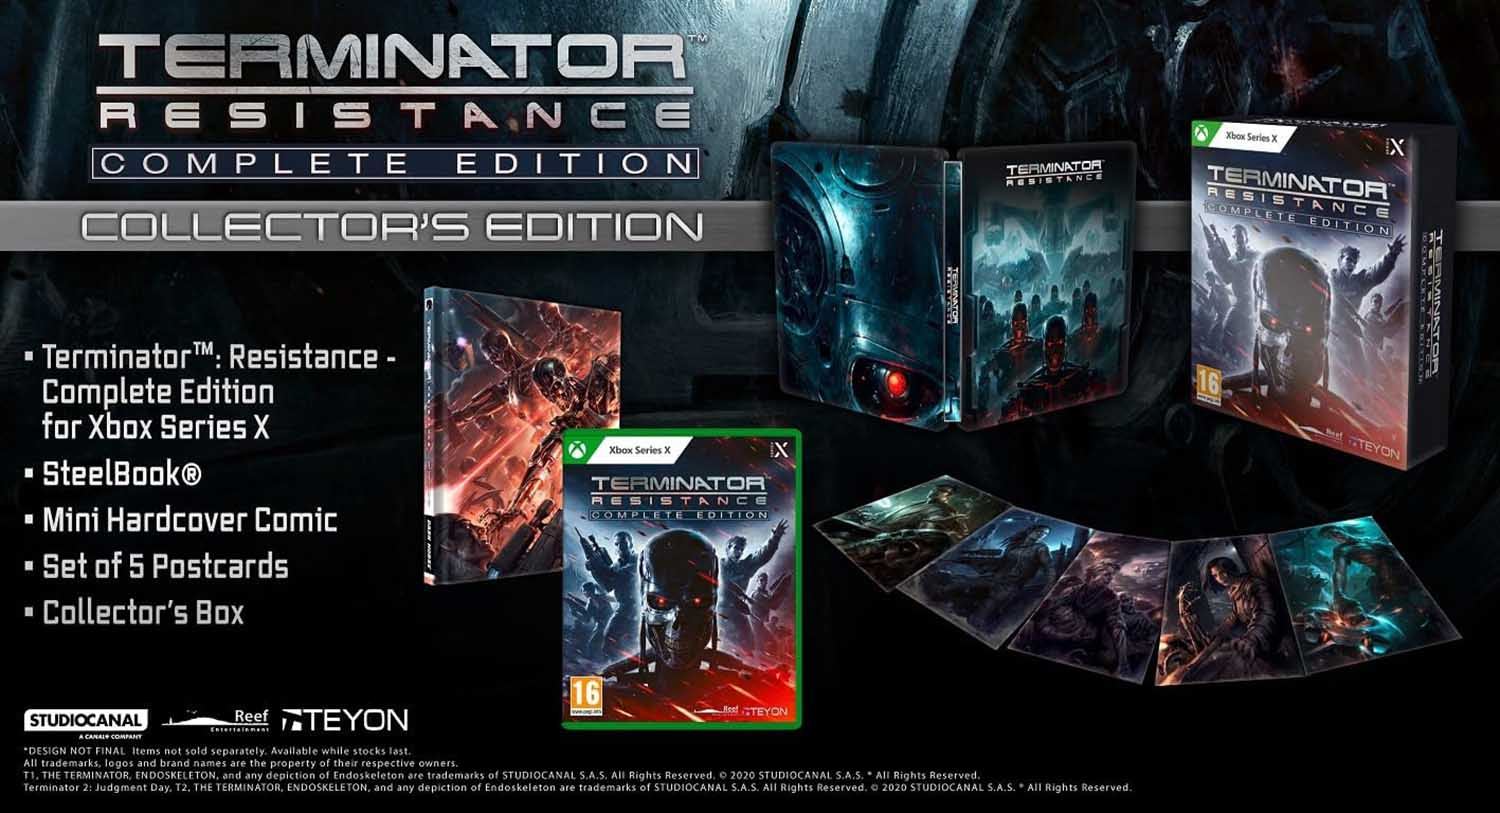 https://s.pacn.ws/1/p/16e/terminator-resistance-complete-edition-collectors-edition-763277.10.jpg?v=ryv119